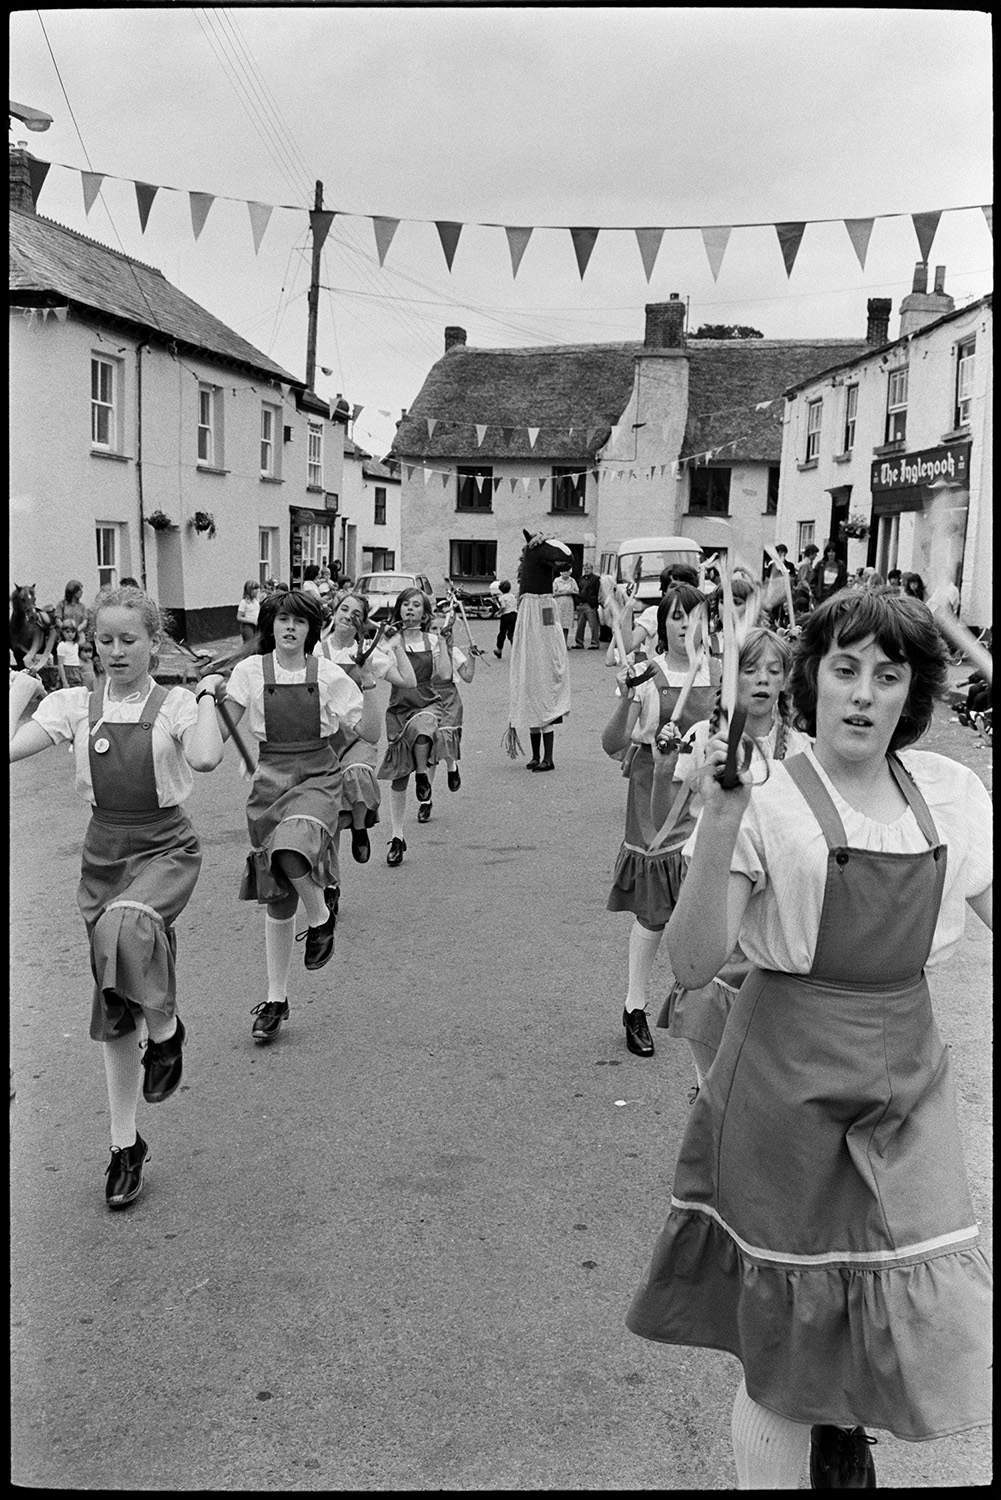 People waiting for fair, cat, pavement artists, Morris Dance.
[A group of girl Morris Dancers or Clog Dancers performing at Winkleigh Fair. A person wearing a horse's head costume is with them. Bunting is strung across the street and  cottages are visible in the background, as well as 'The Inglenook'.]